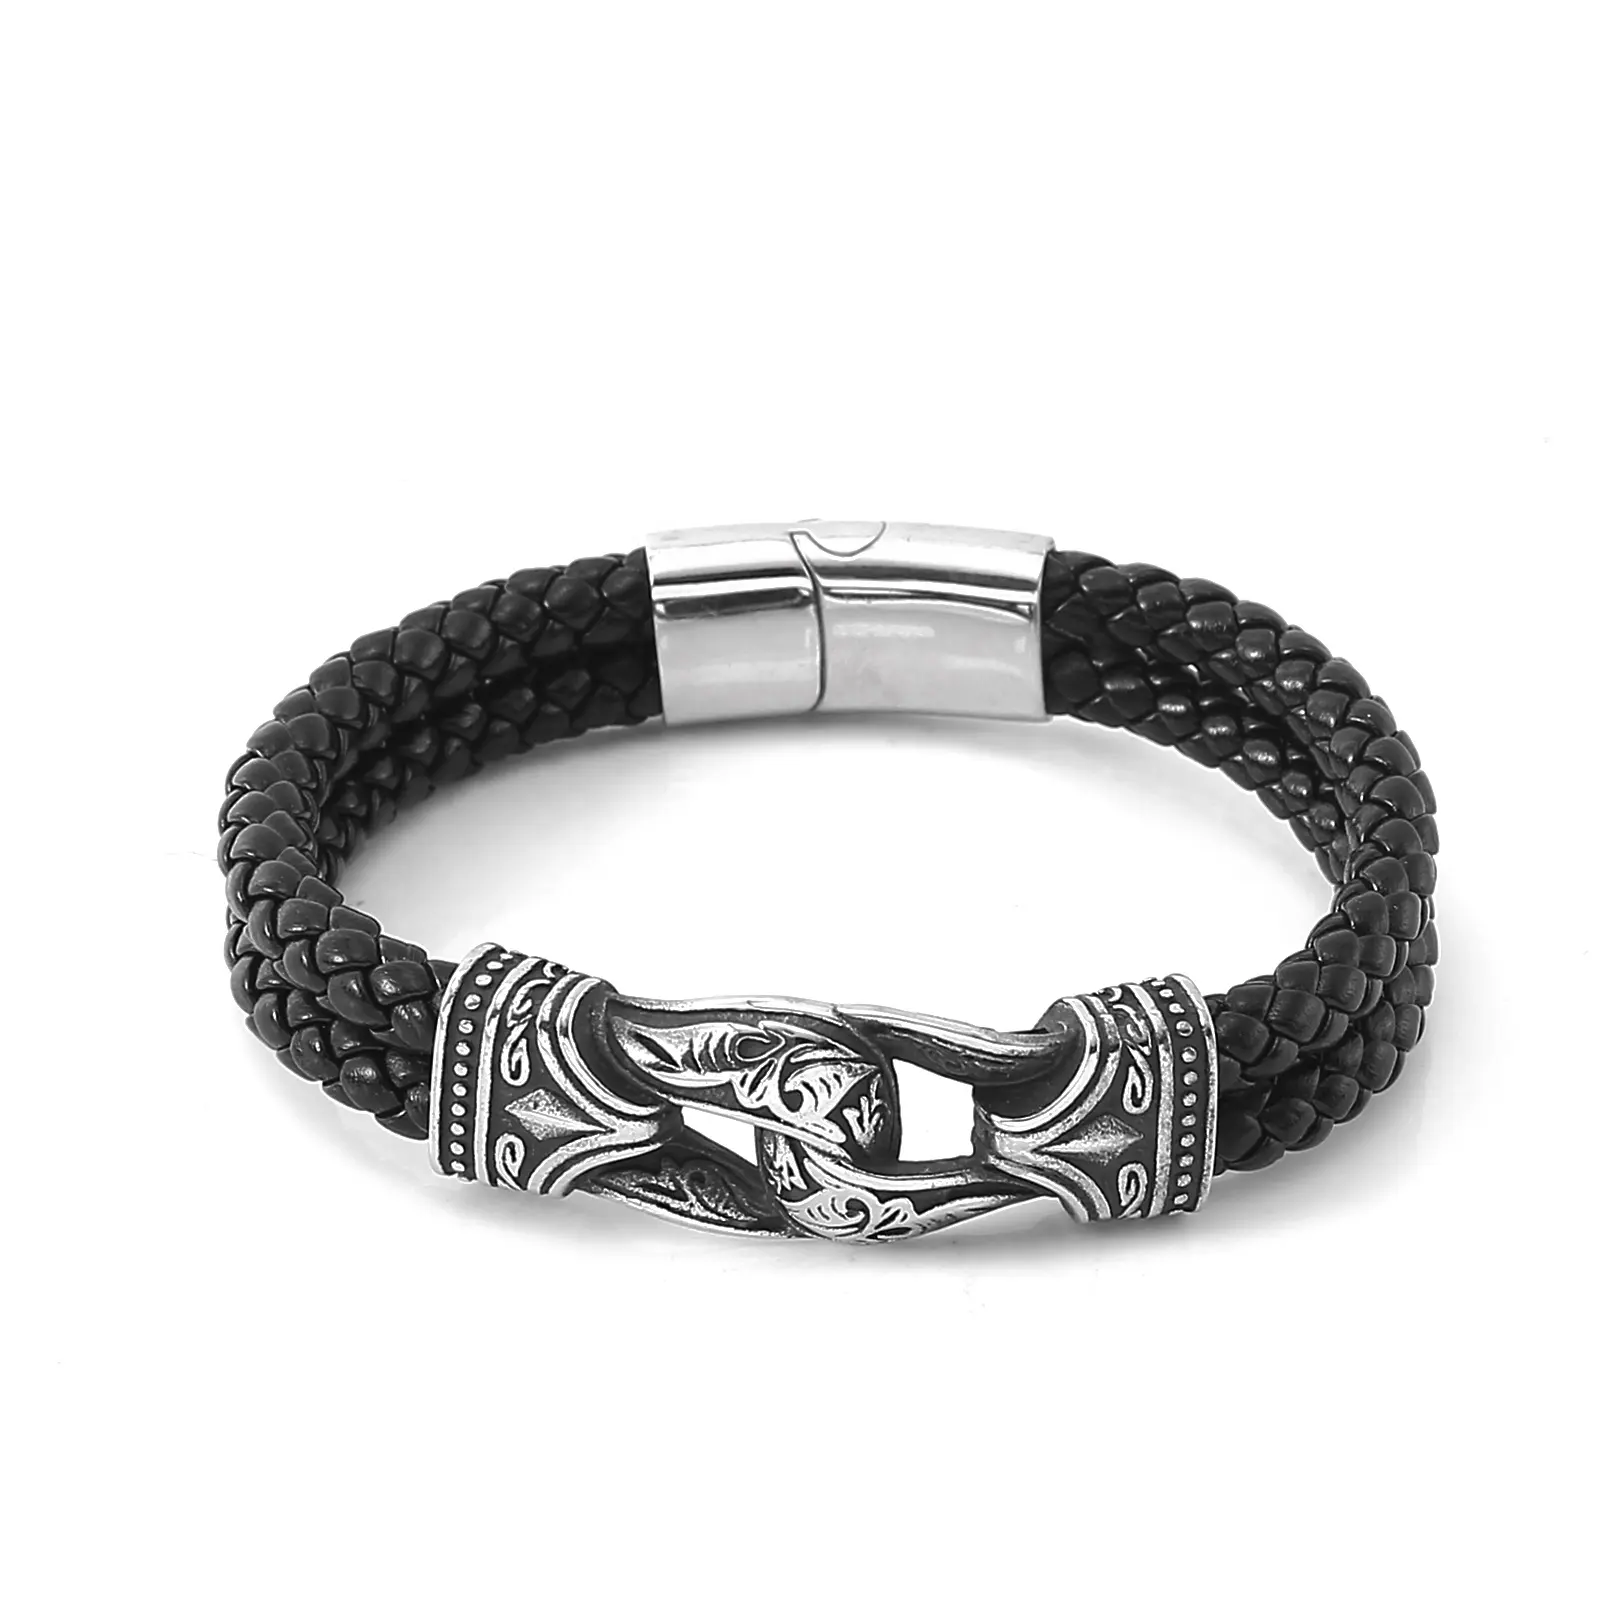 Northern Viking Jewelry Stainless Steel And Leather Baldr Bracelet Norse Leather Arm Cuff Mens